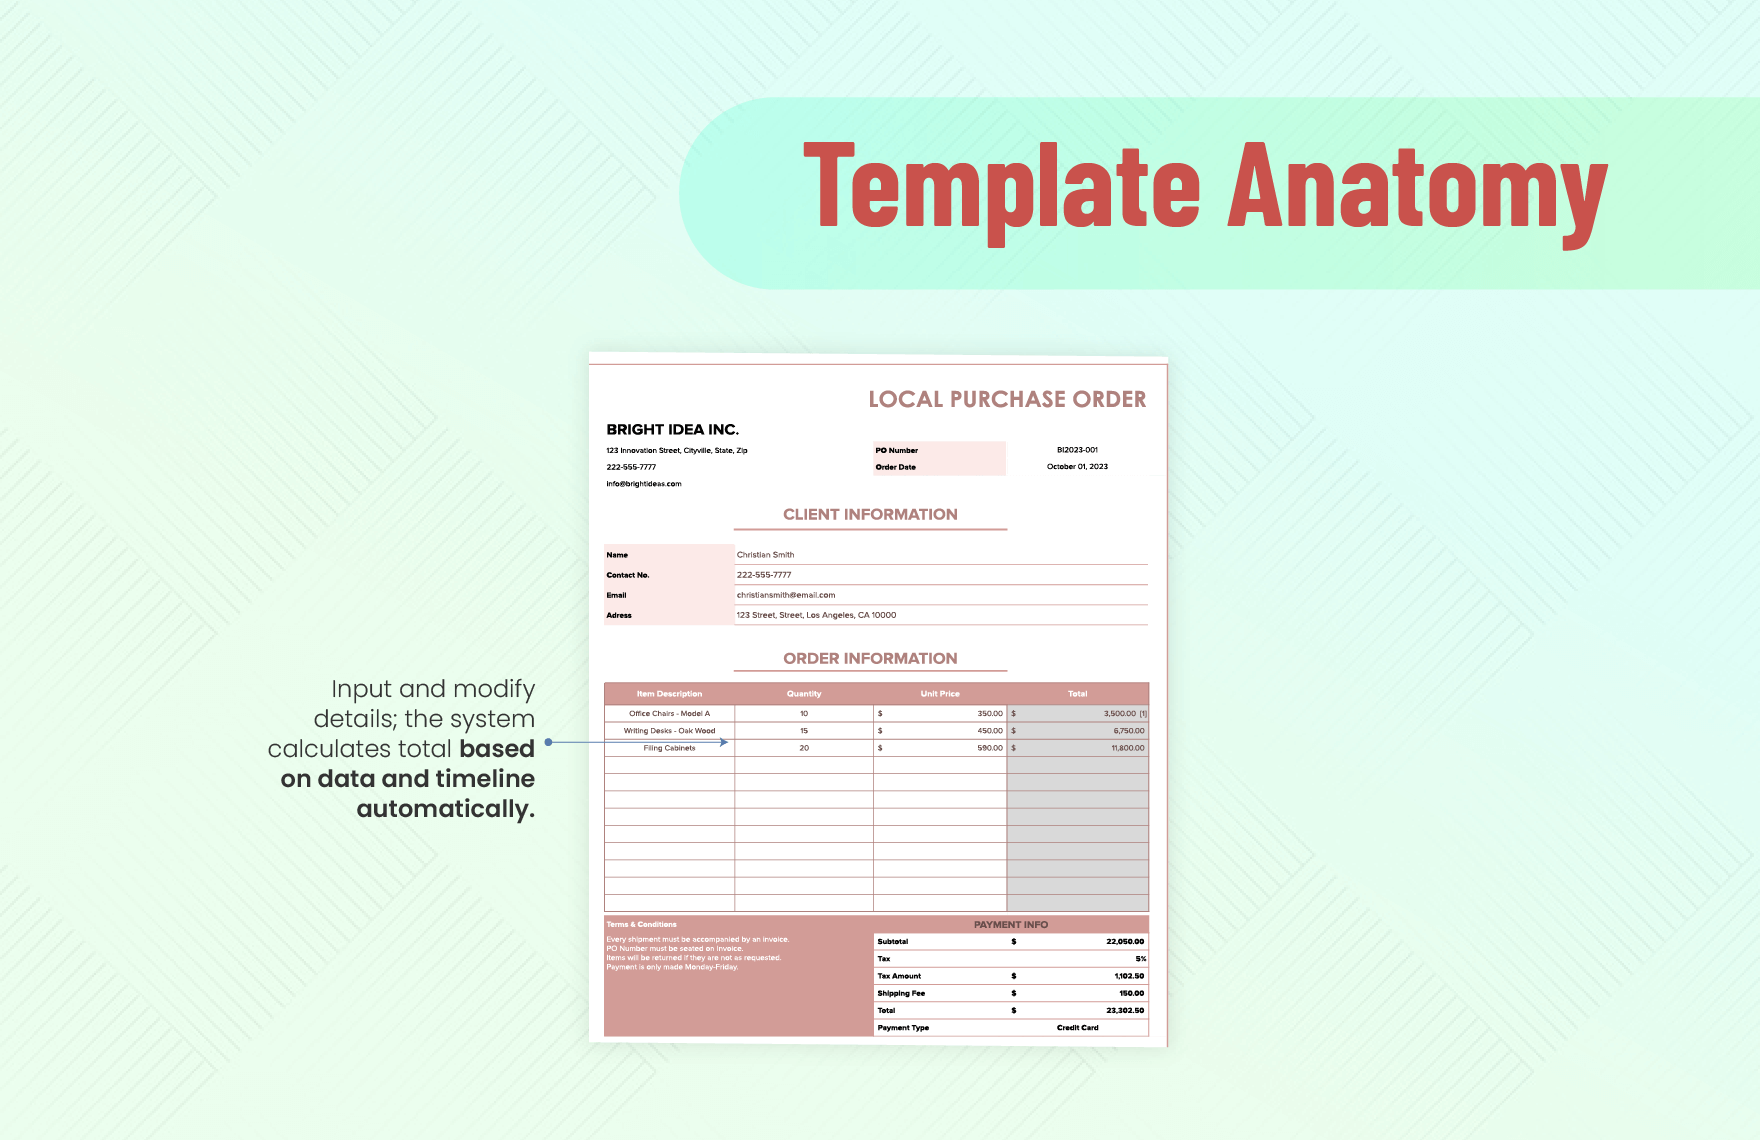 Local Purchase Order Template